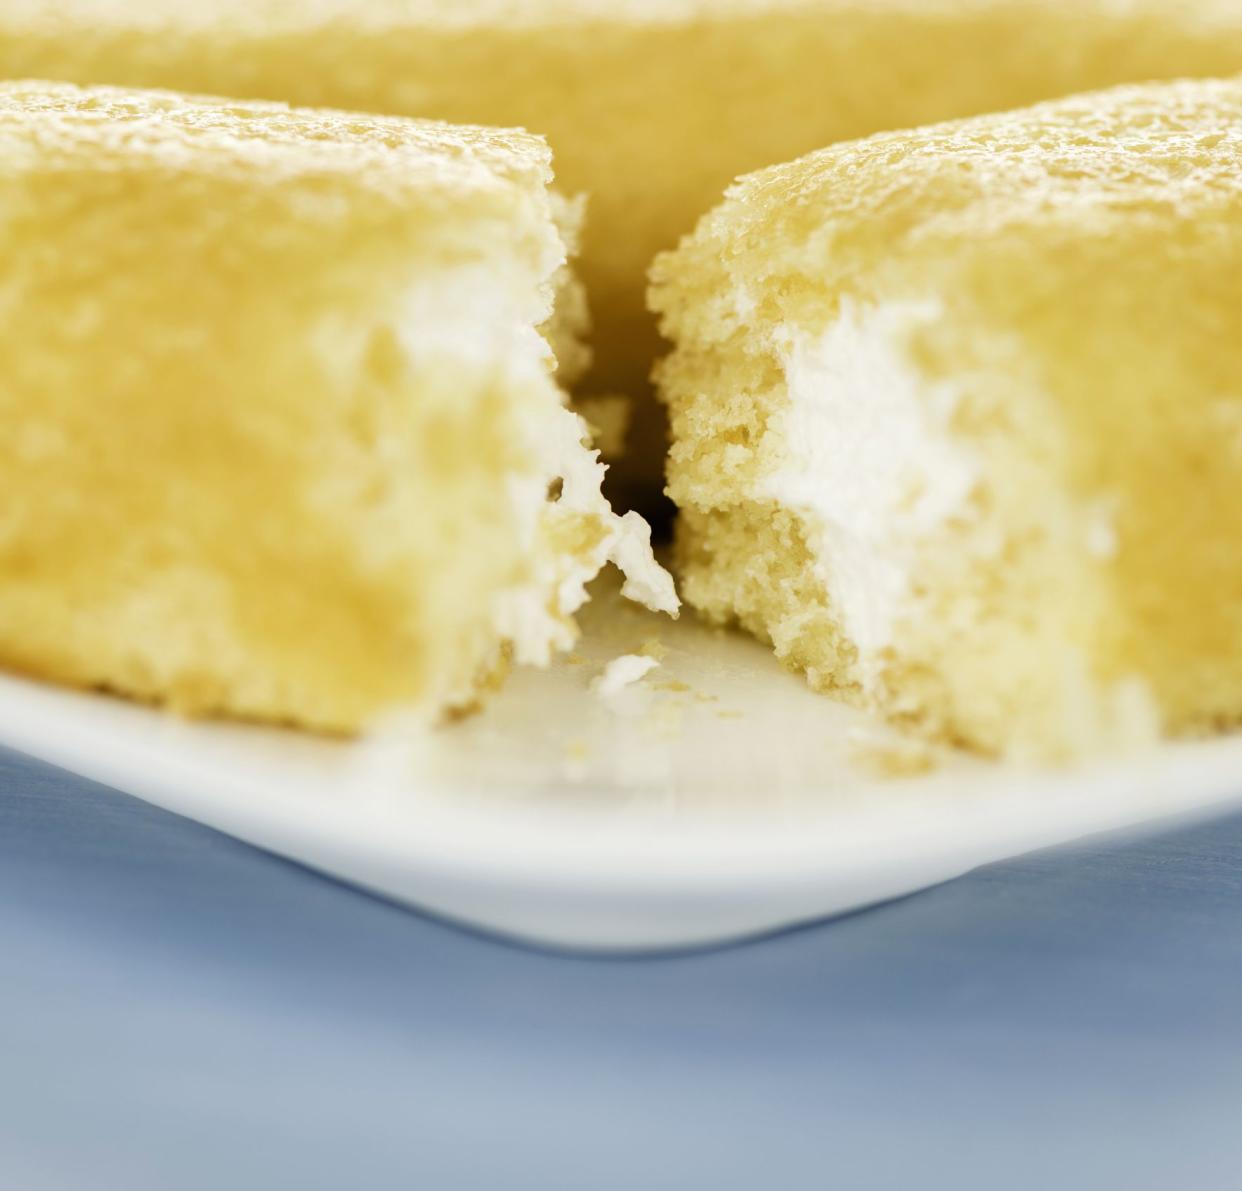 Suffolk, Virginia, USA - September 28, 2013: A square format studio shot of two Hostess Twinkies cakes with the front one broken open showing creamy filling.